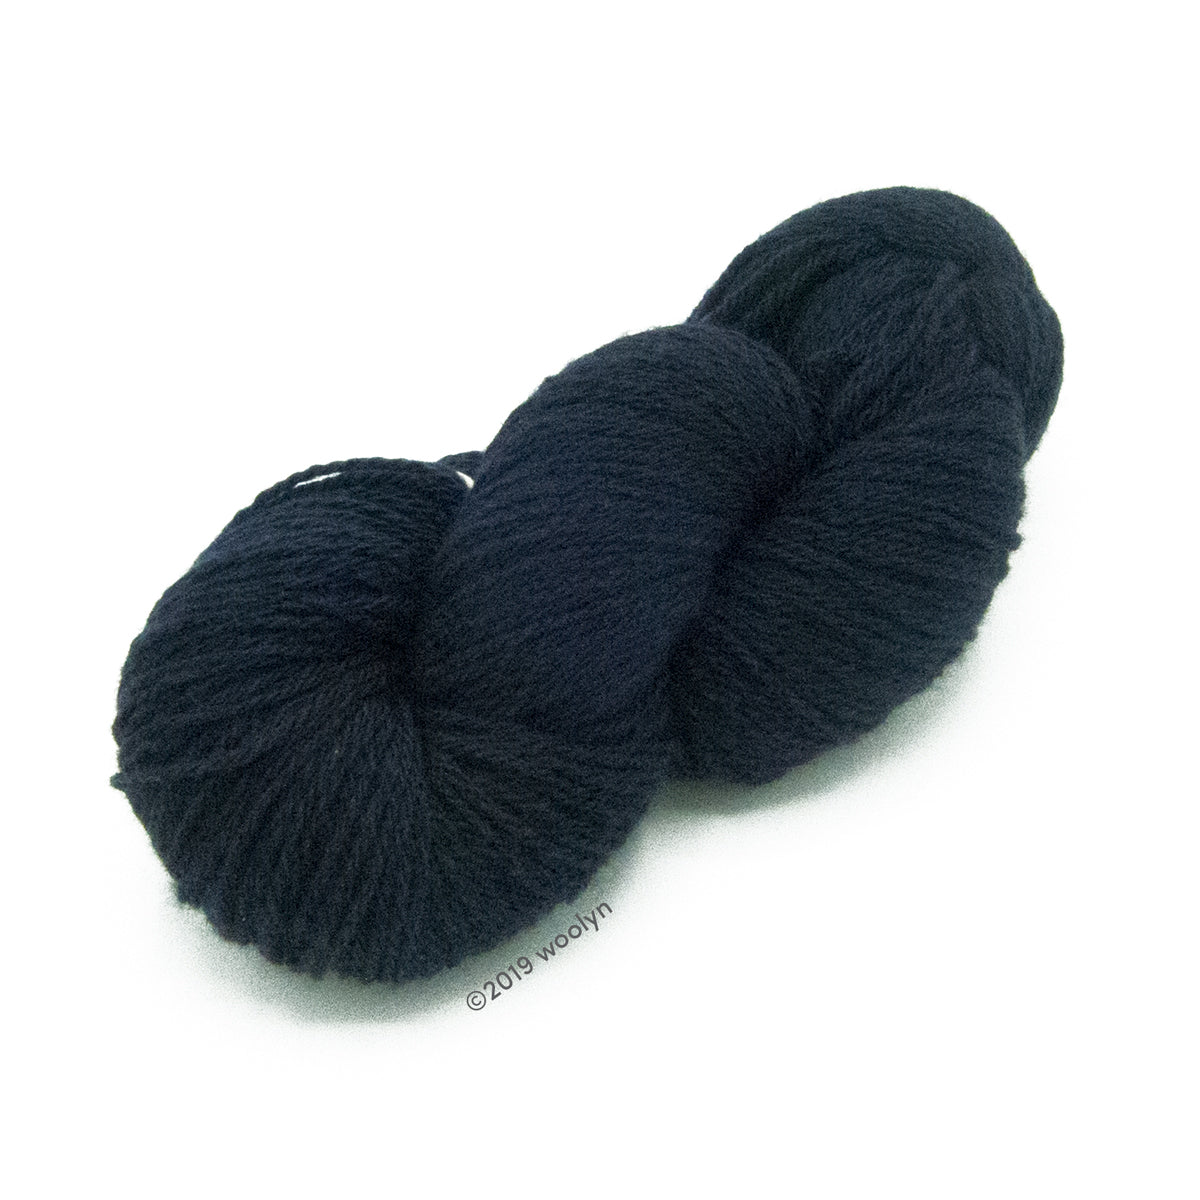 North Light Fibers Spring St in Jack's Blue, a navy color.